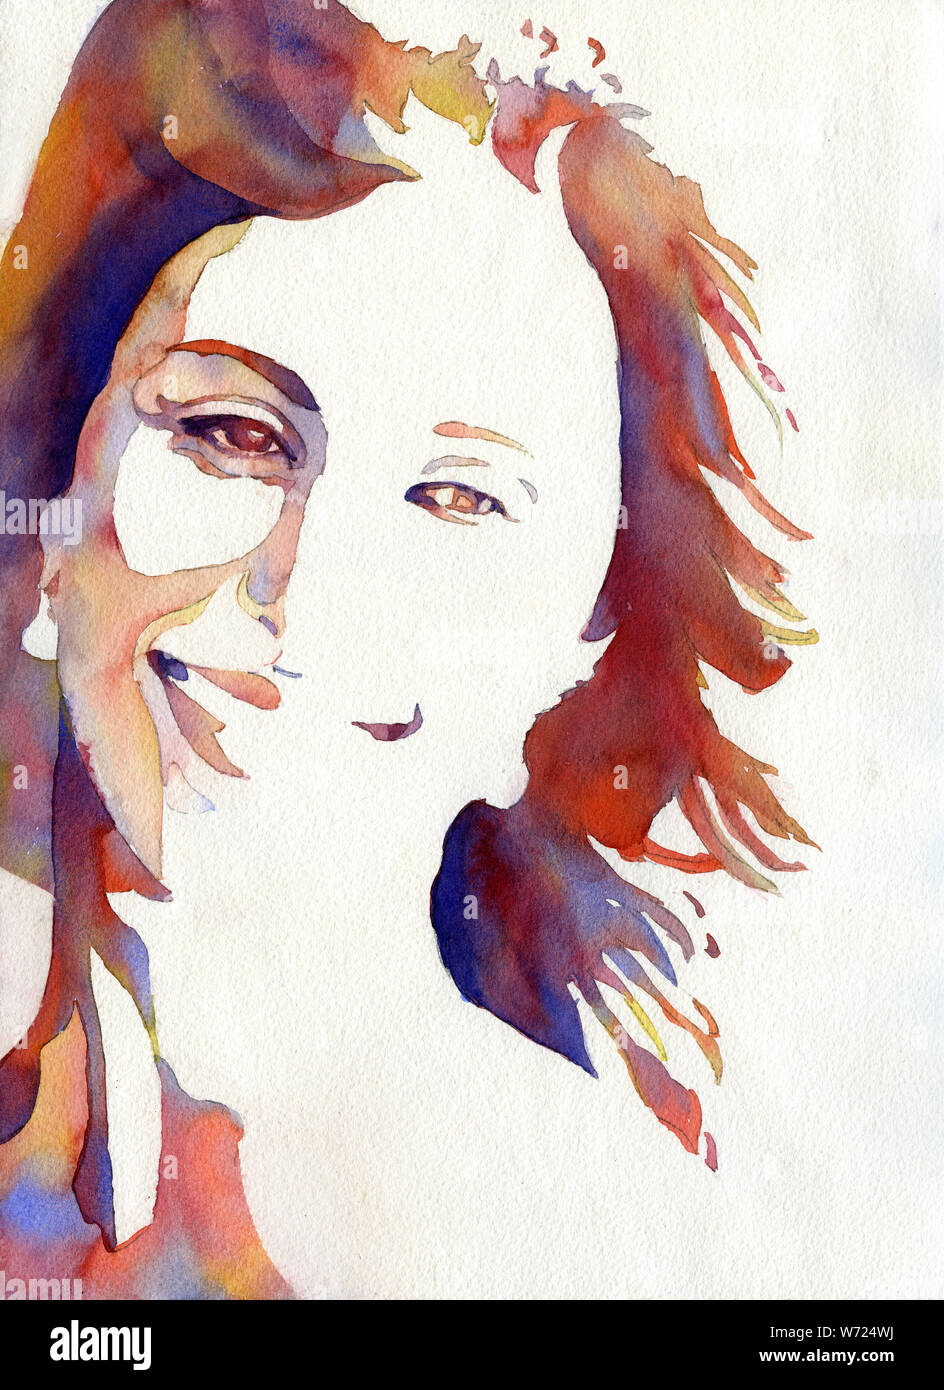 Watercolor illustrations people